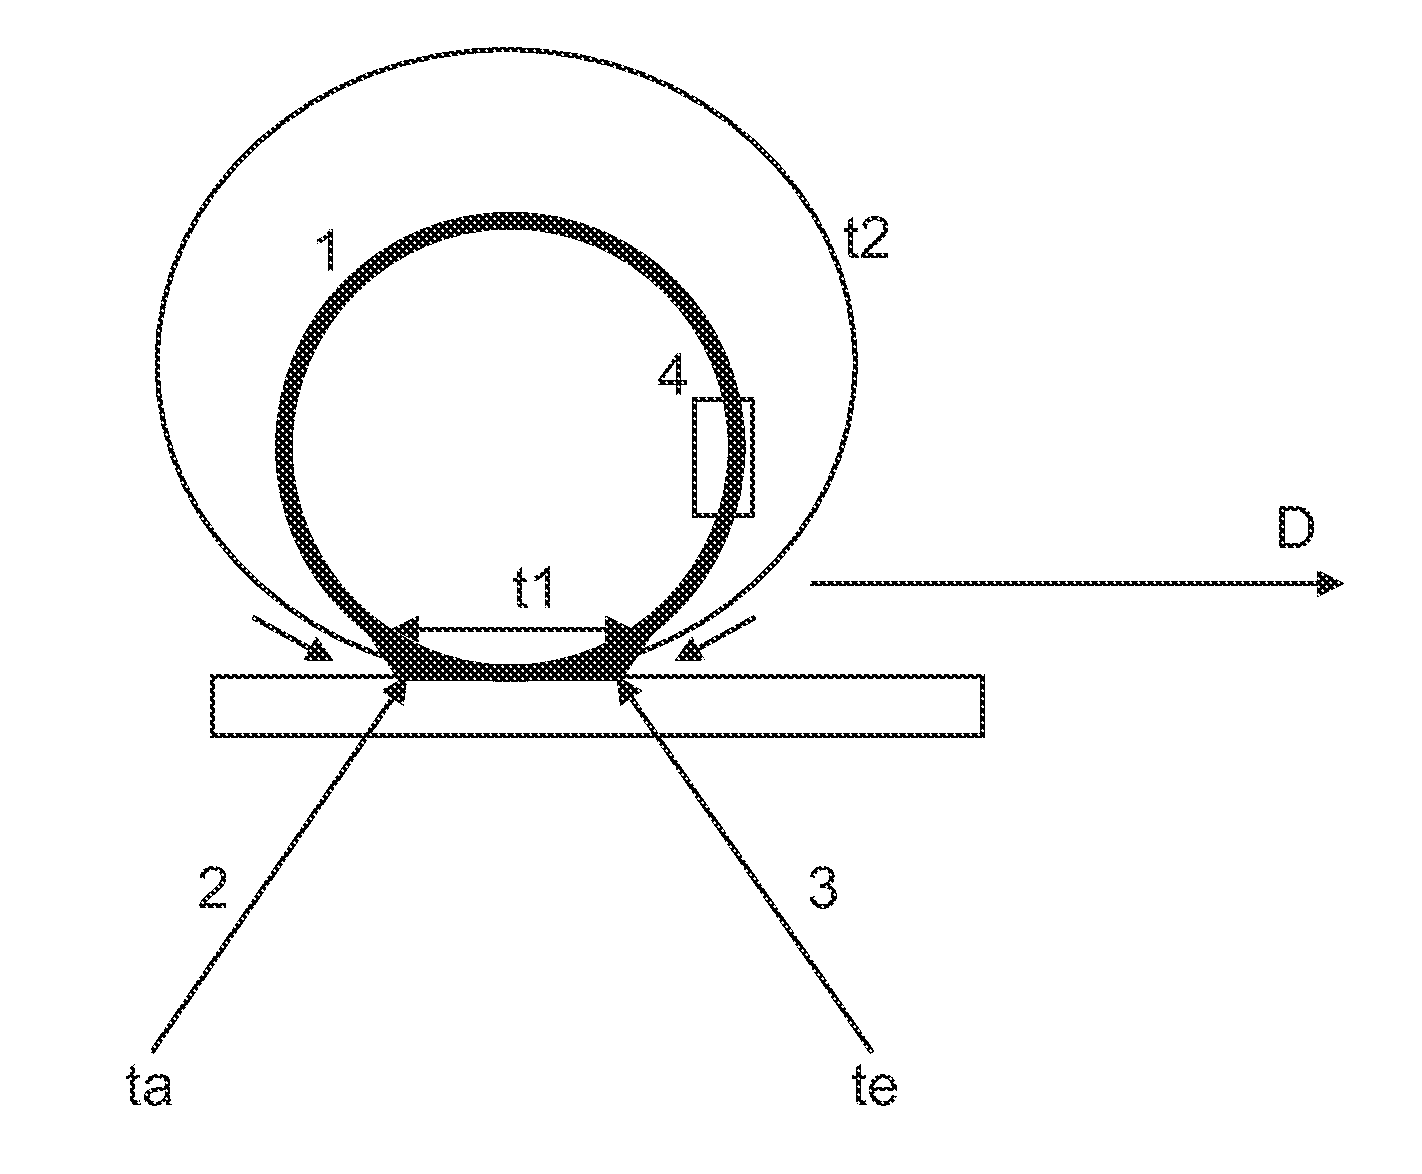 Method for monitoring the load of vehicle tires